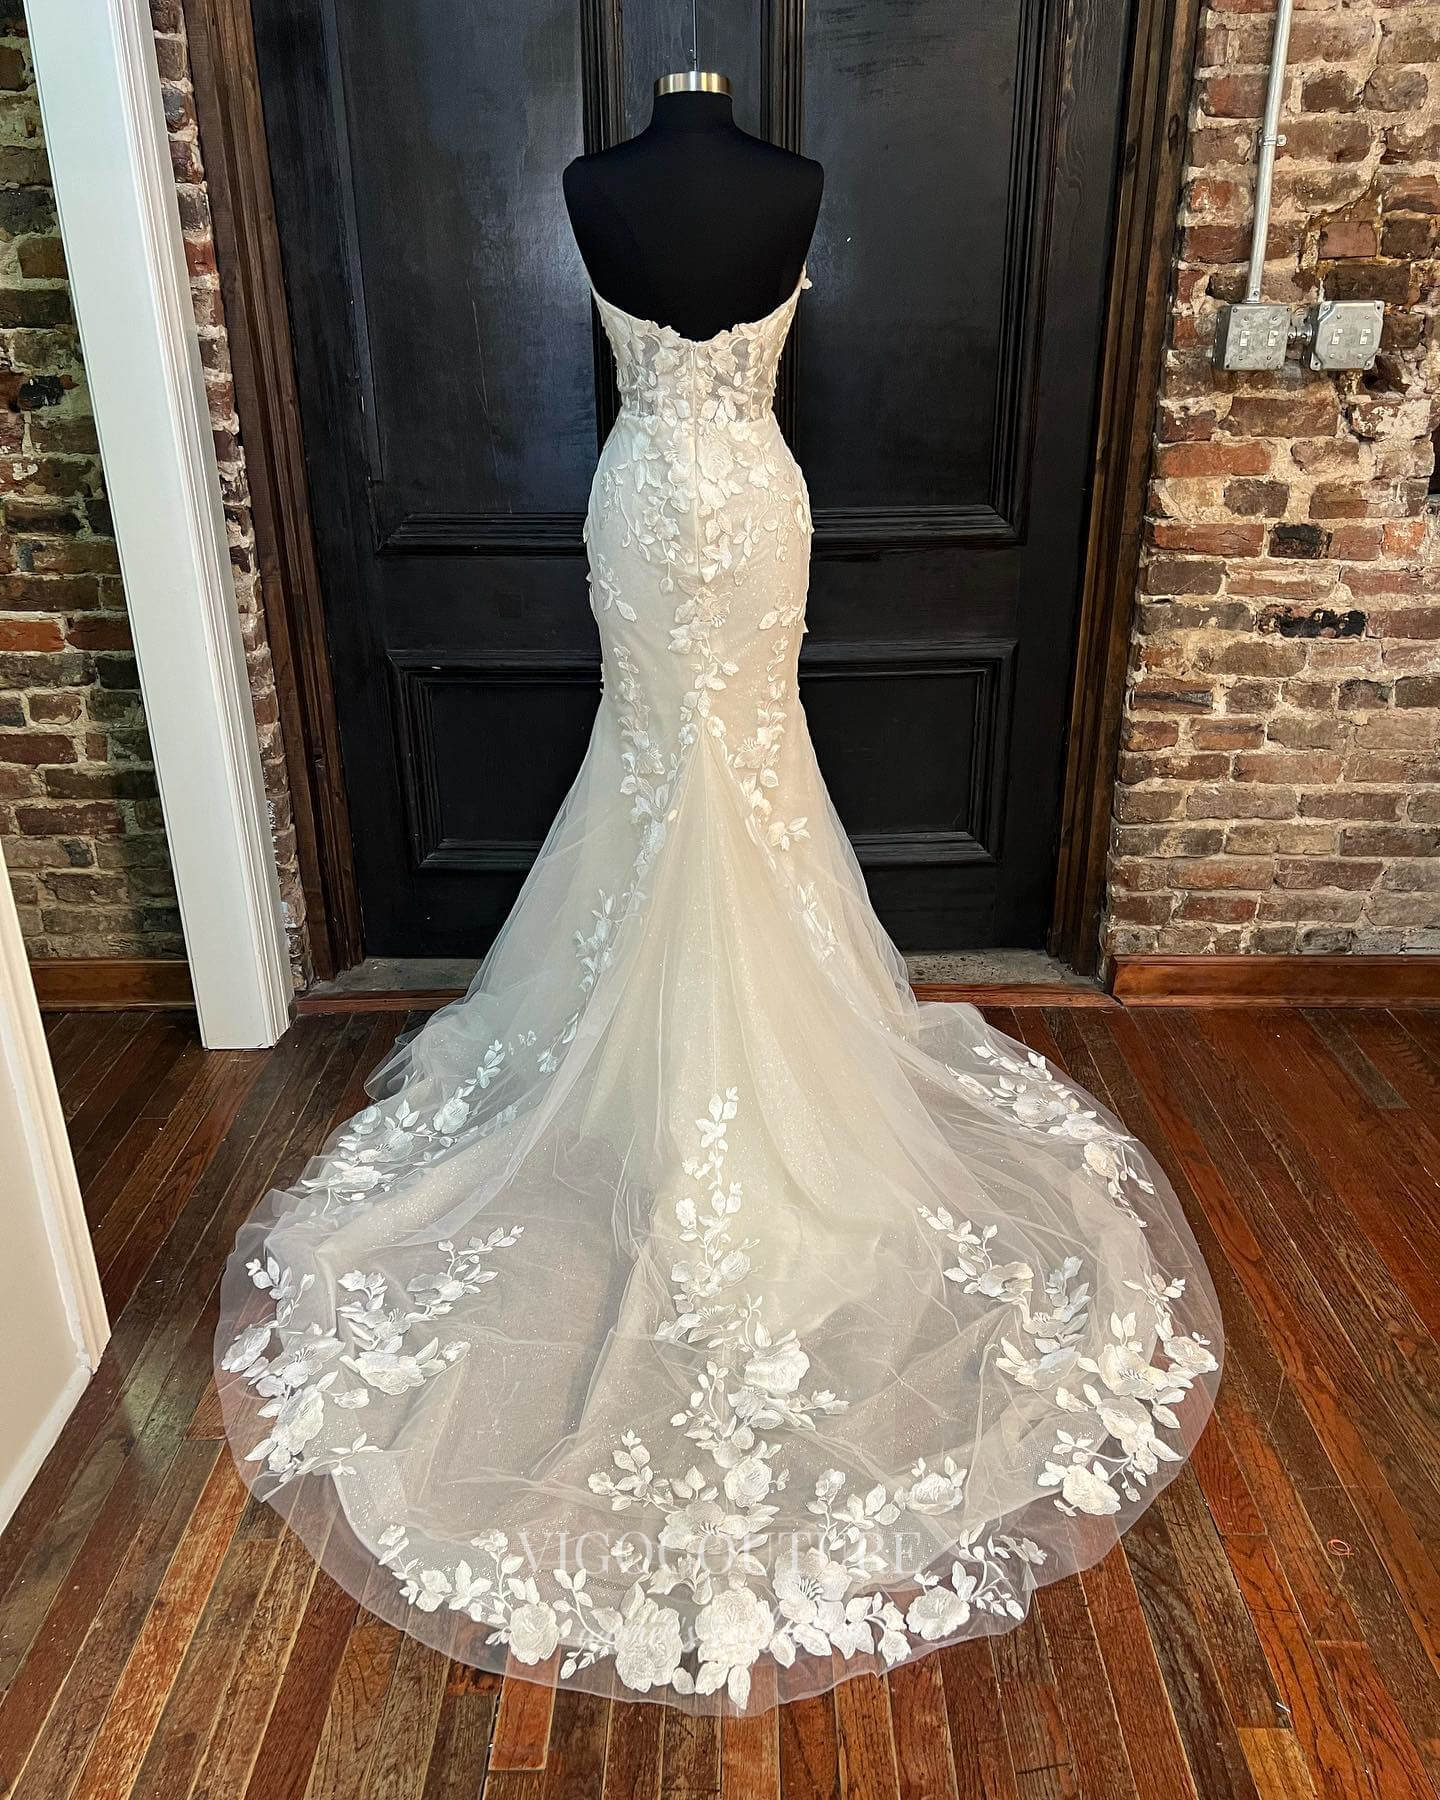 Ivory Lace Applique Wedding Dresses Sweetheart Neck Bridal Gown W0097-Wedding Dresses-vigocouture-Ivory-US2-vigocouture